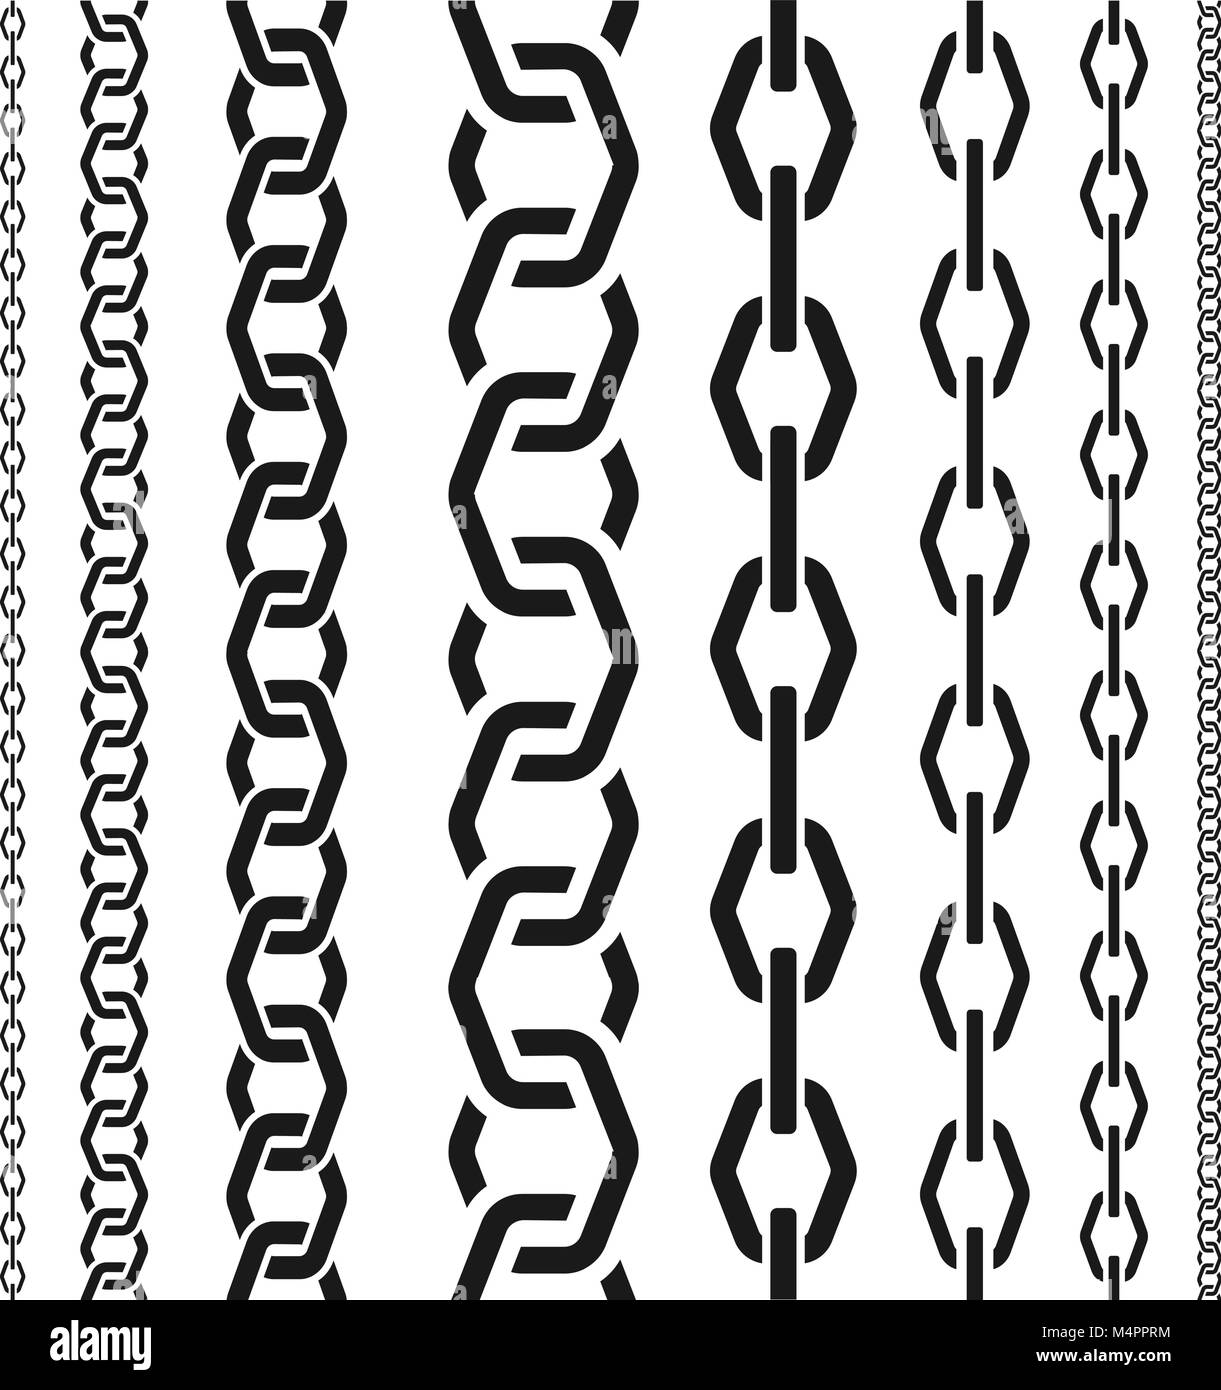 Chains set of different scale, unusual polygonal shape, seamless vertical pattern, black silhouette vector illustration. Stock Vector